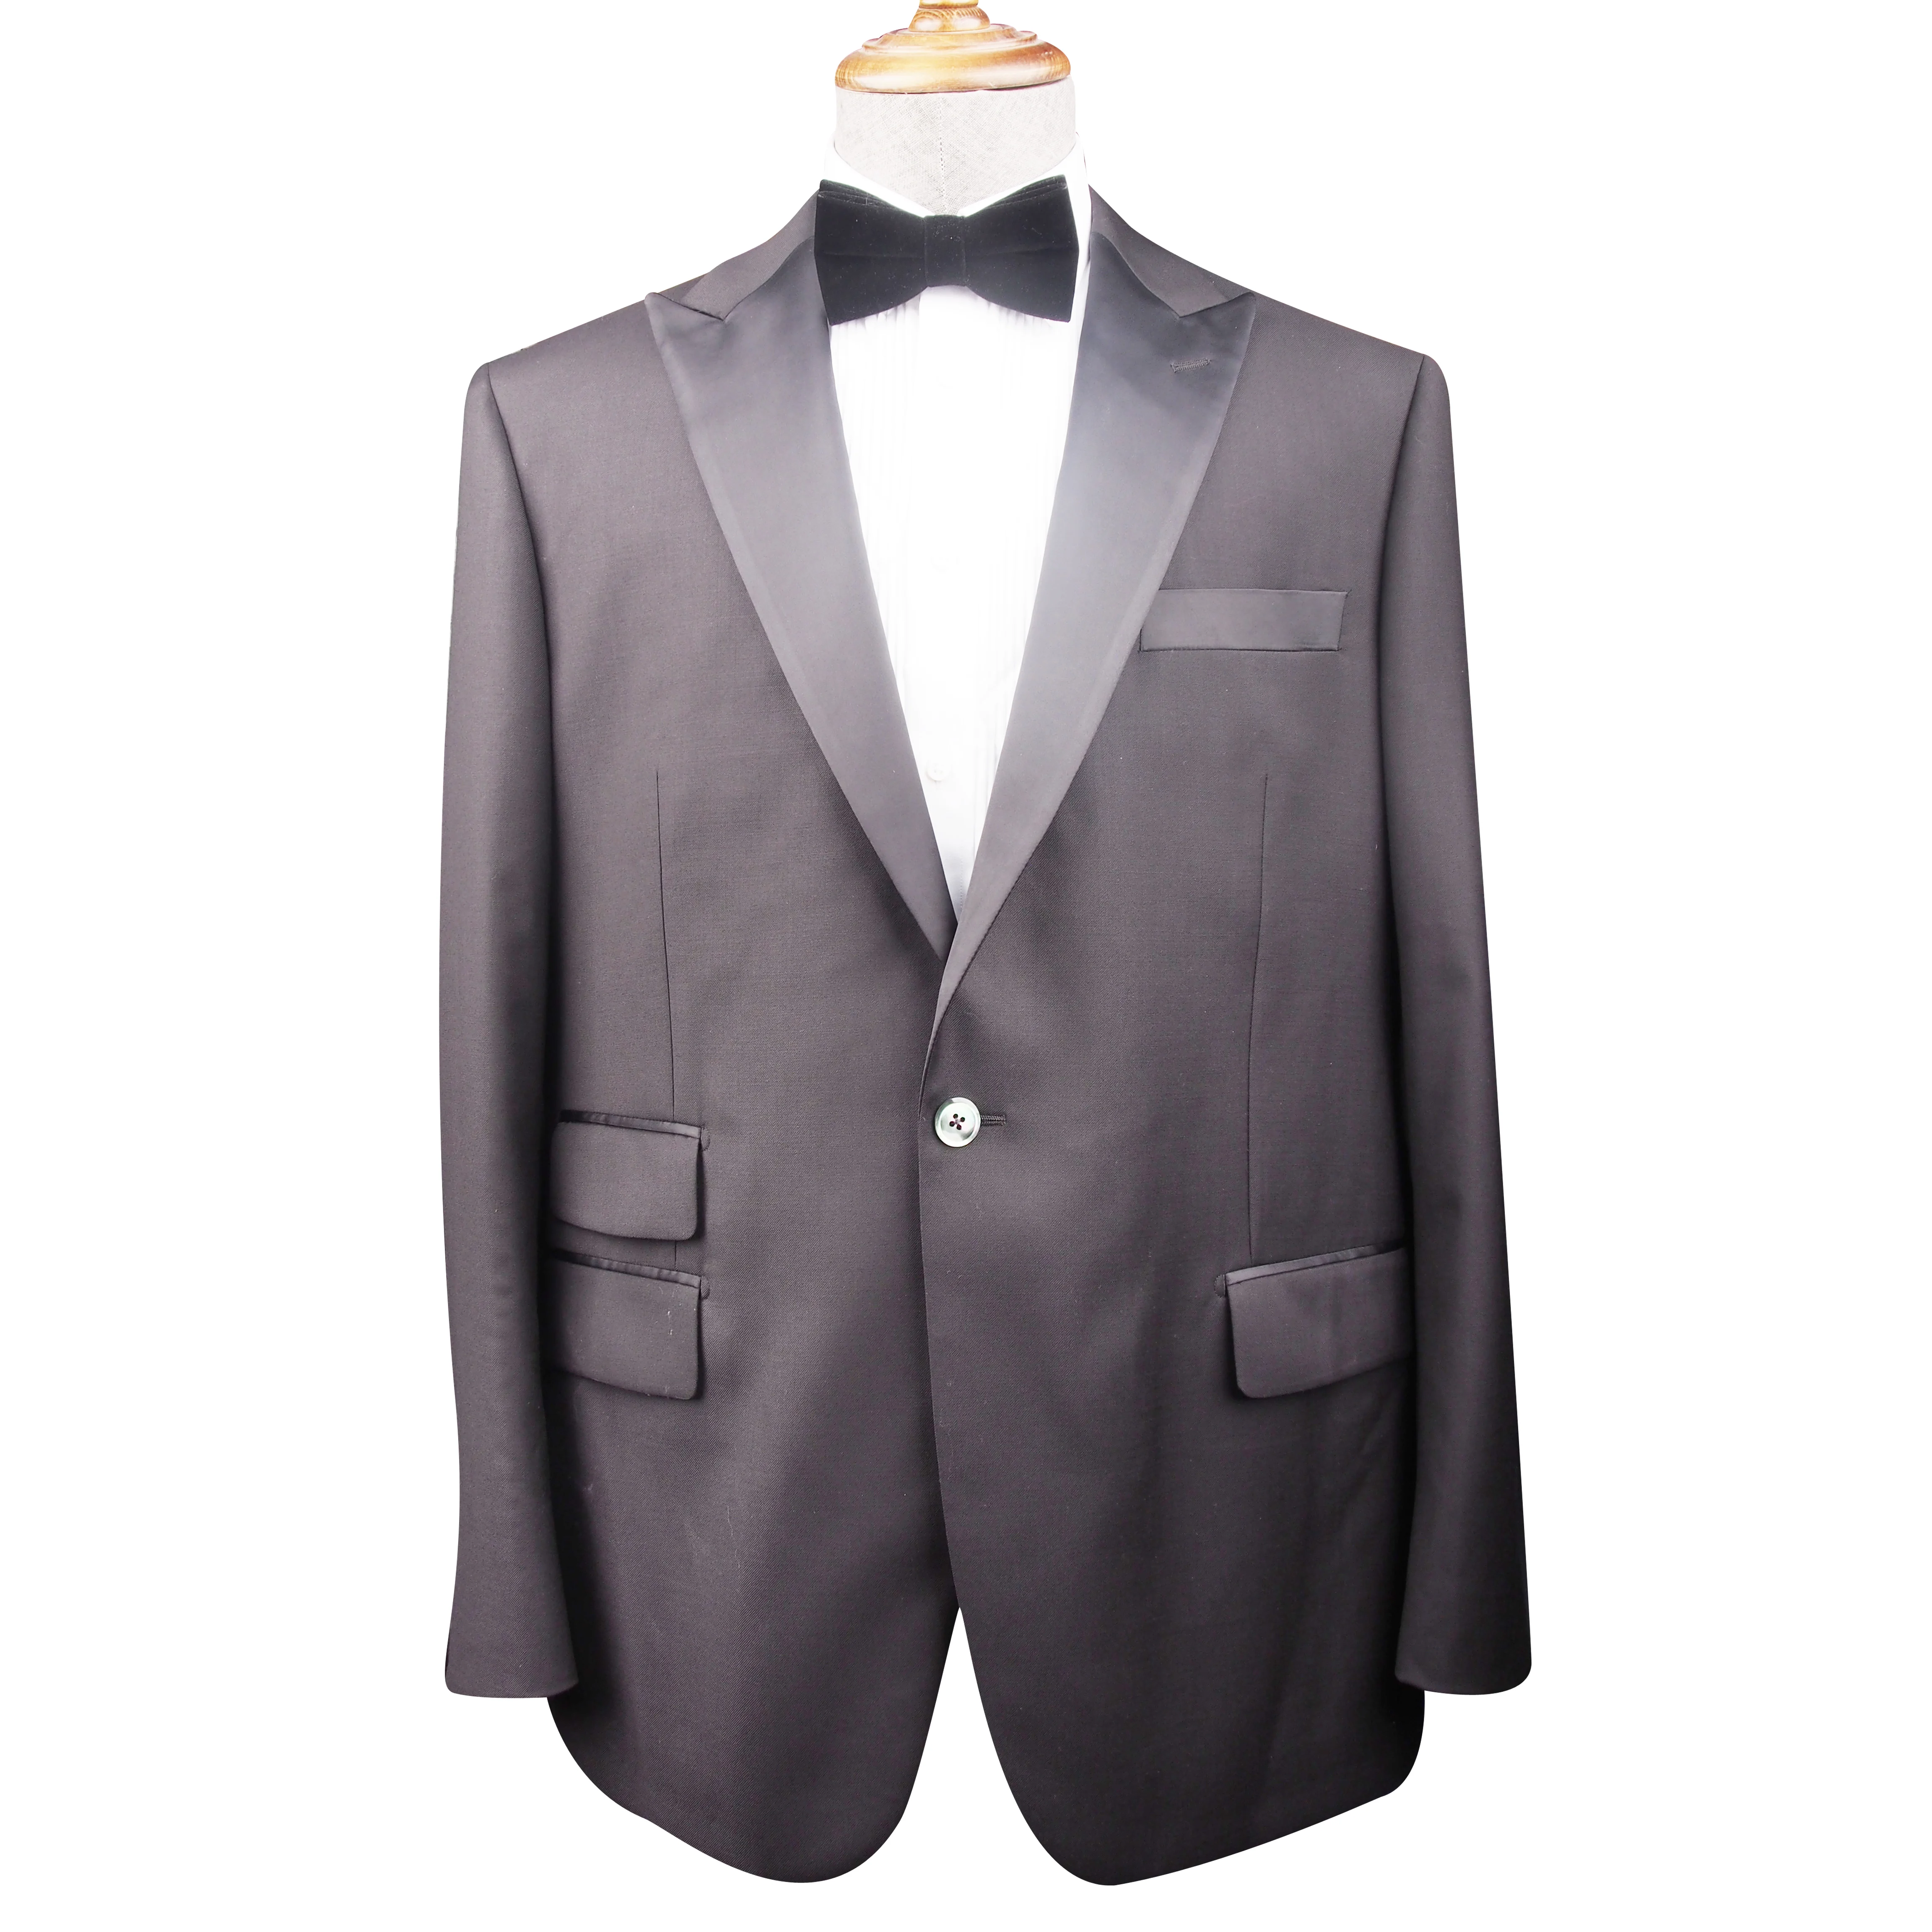 made in China wholesale 2 pezzi 100% Wool  Tuxedo Suit modern men's suit